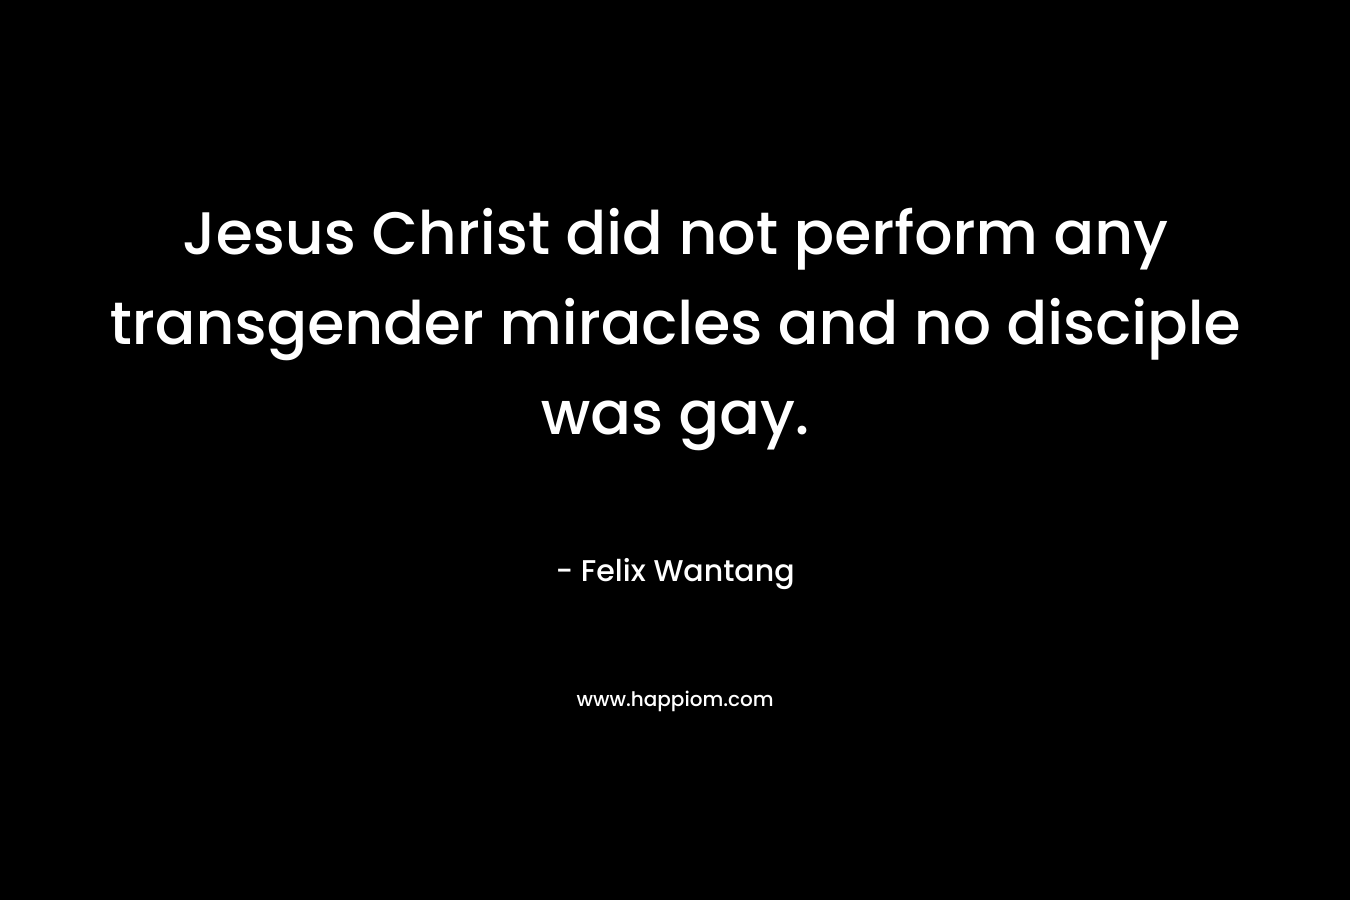 Jesus Christ did not perform any transgender miracles and no disciple was gay.